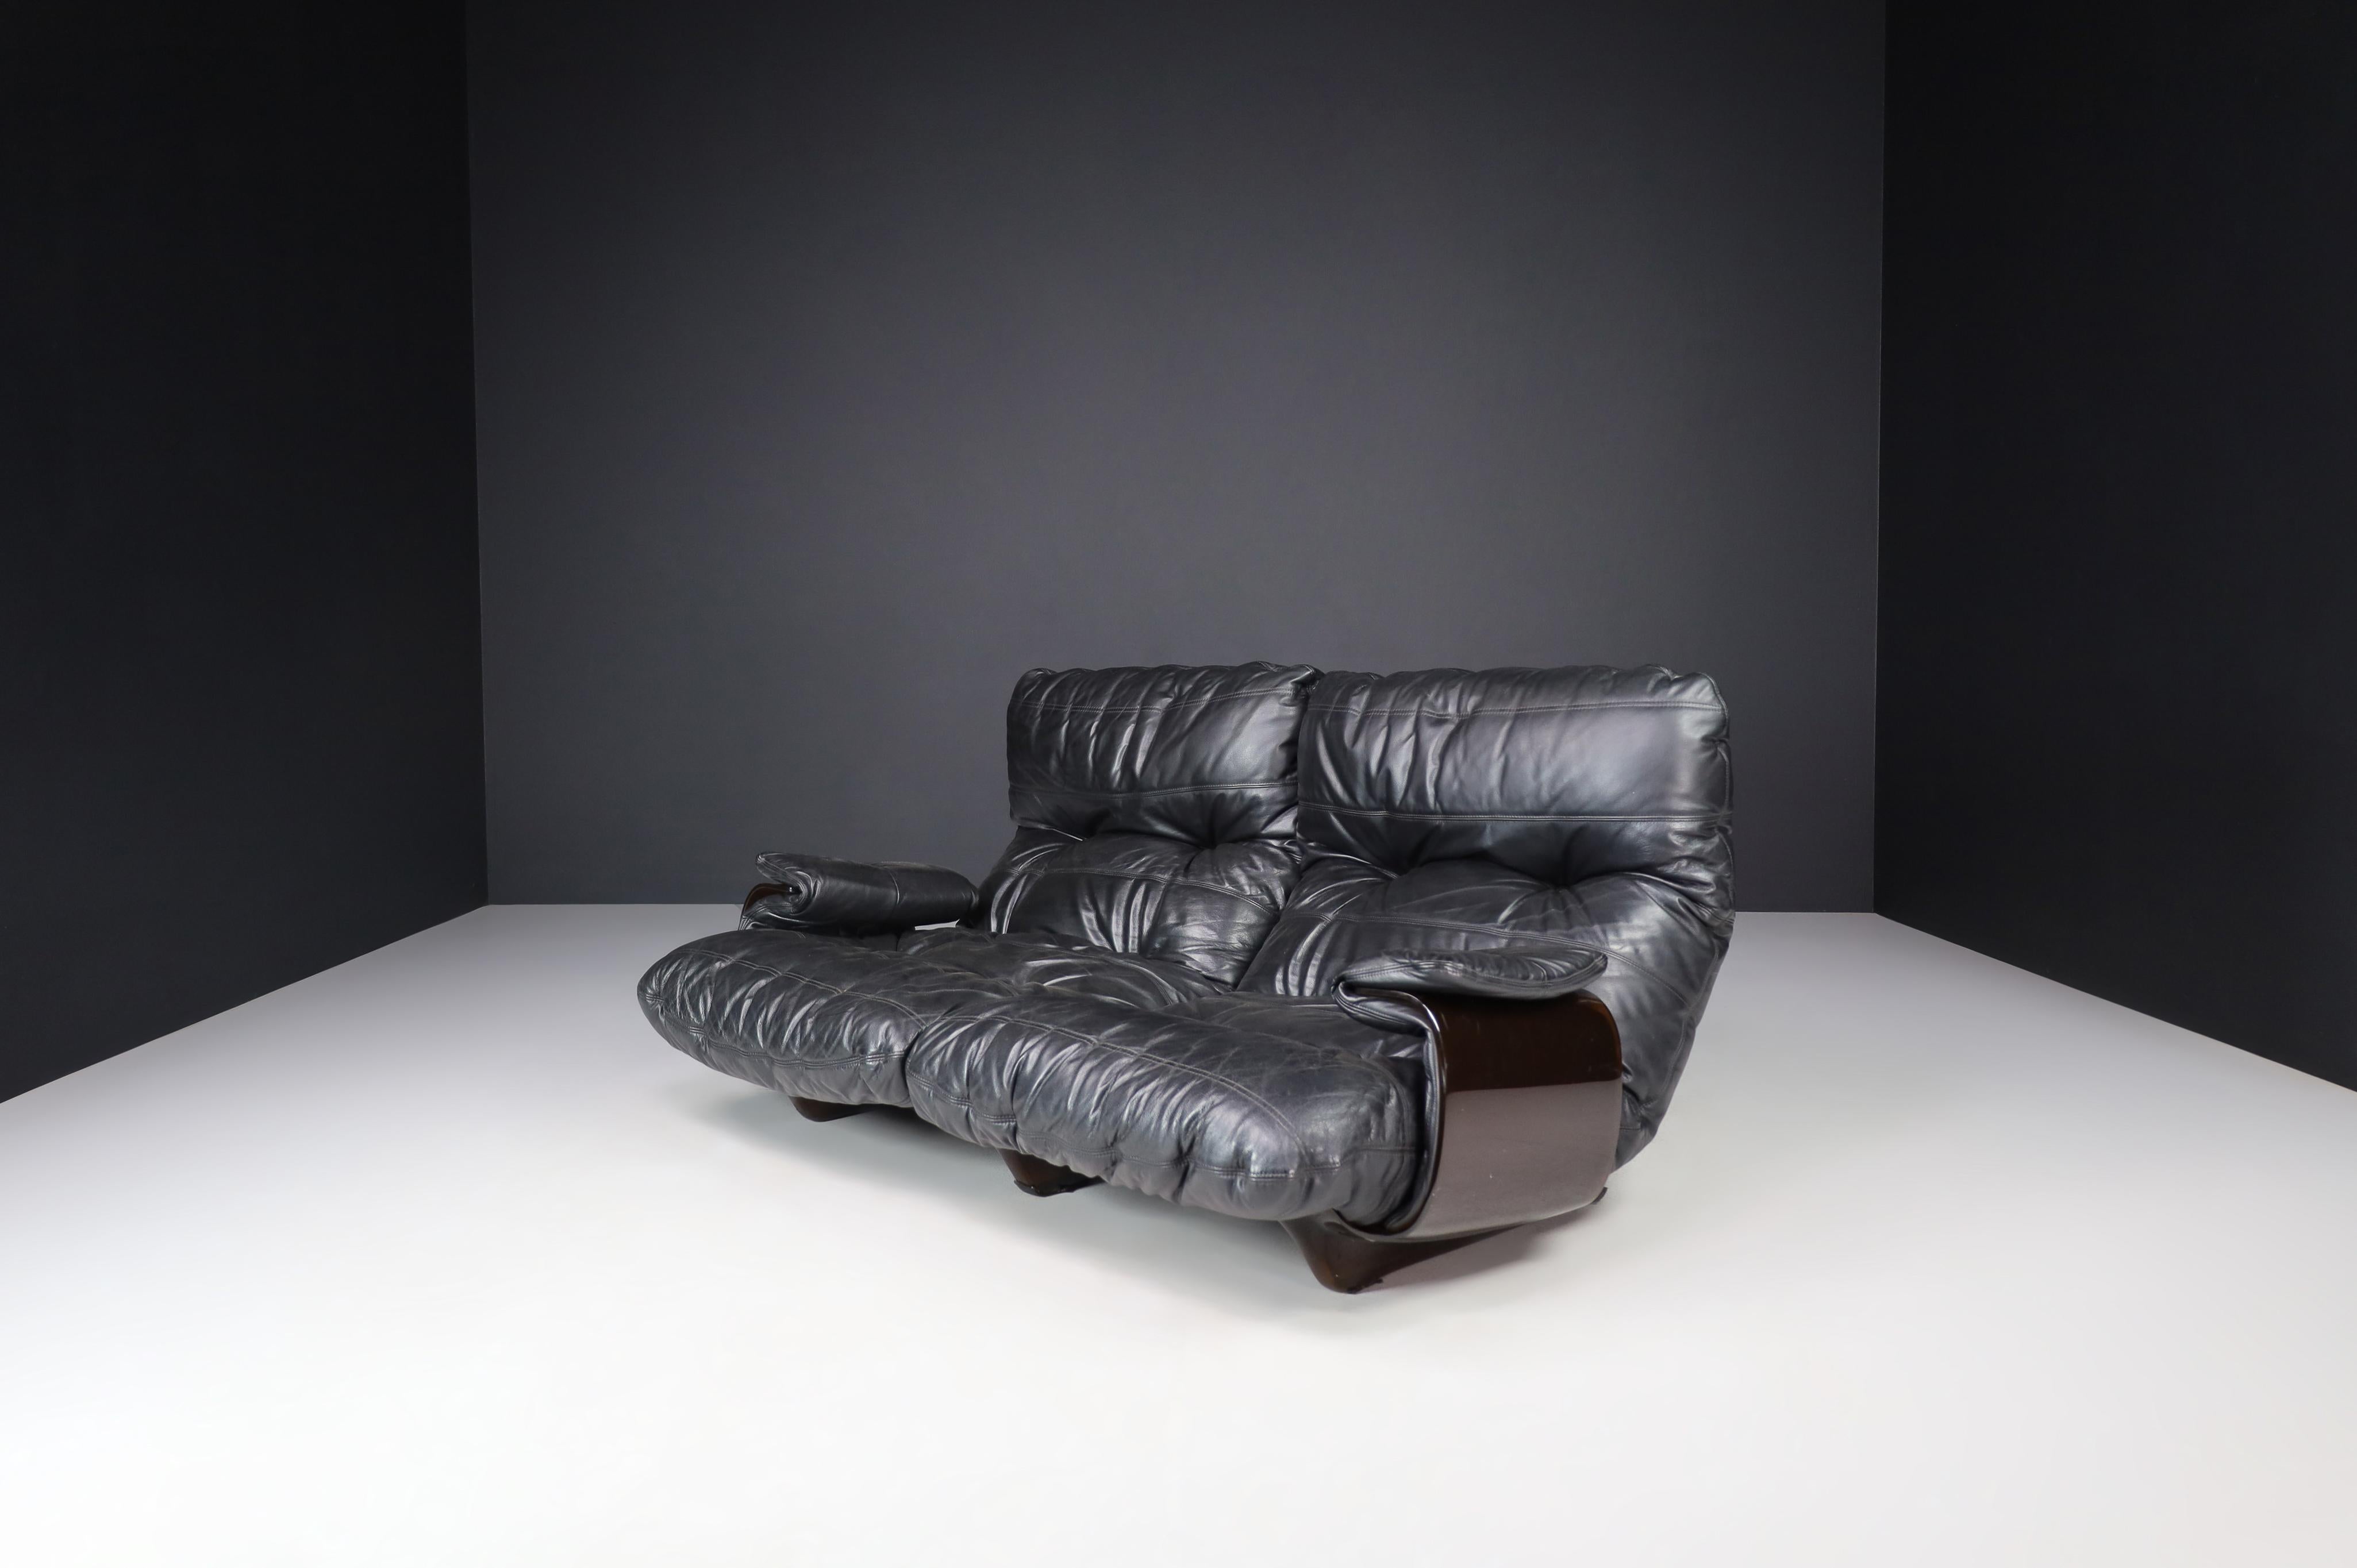 Ligne Roset Marsala sofa in black leather by Michel Ducaroy, the 1970s.

Good-looking black leather Marsala two-seater sofa by Michel Ducaroy for Ligne Roset 1970s. The large leather cushions in a smoke-colored plexiglass shell give a clean but